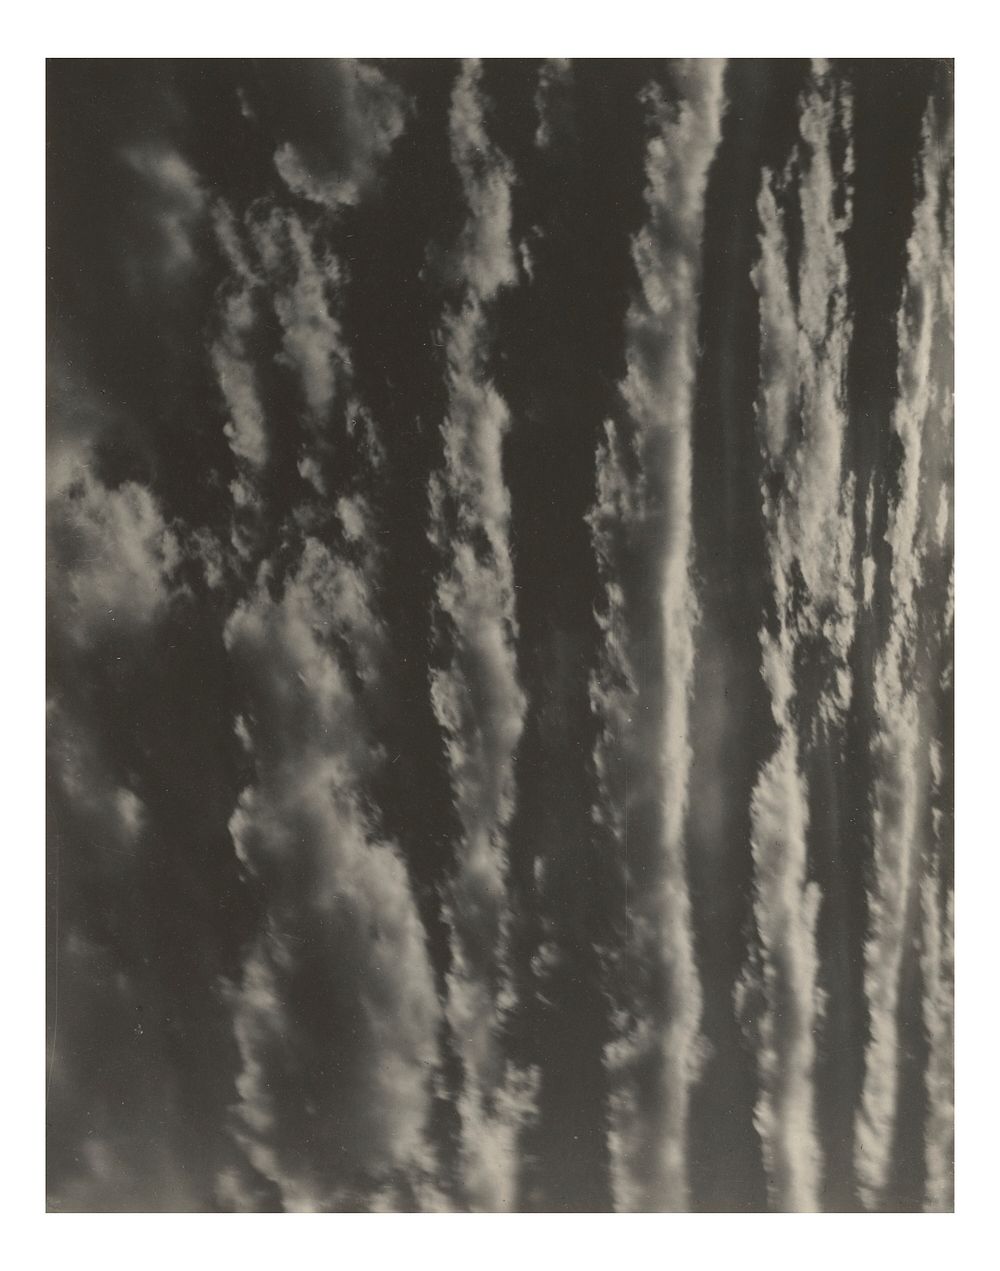 Songs of the Sky (1924) photo in high resolution by Alfred Stieglitz. 